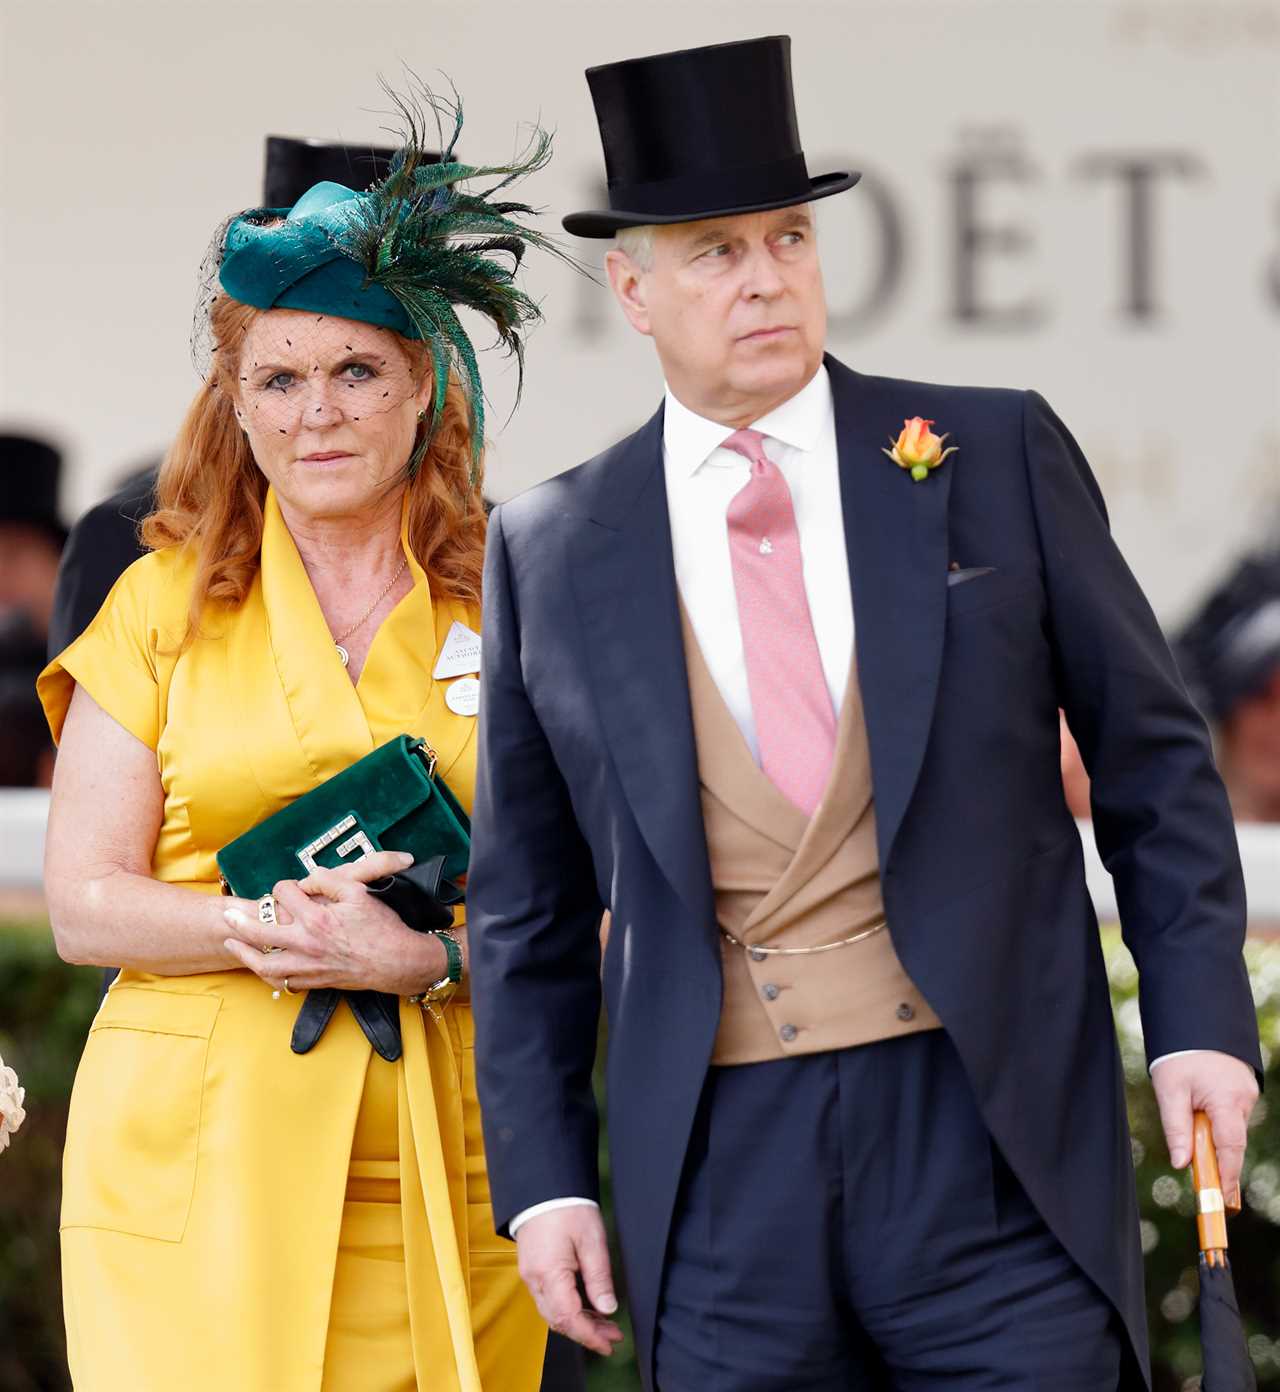 Prince Andrew could move into ex-wife Sarah Ferguson £5million house as he faces eviction from Royal Lodge